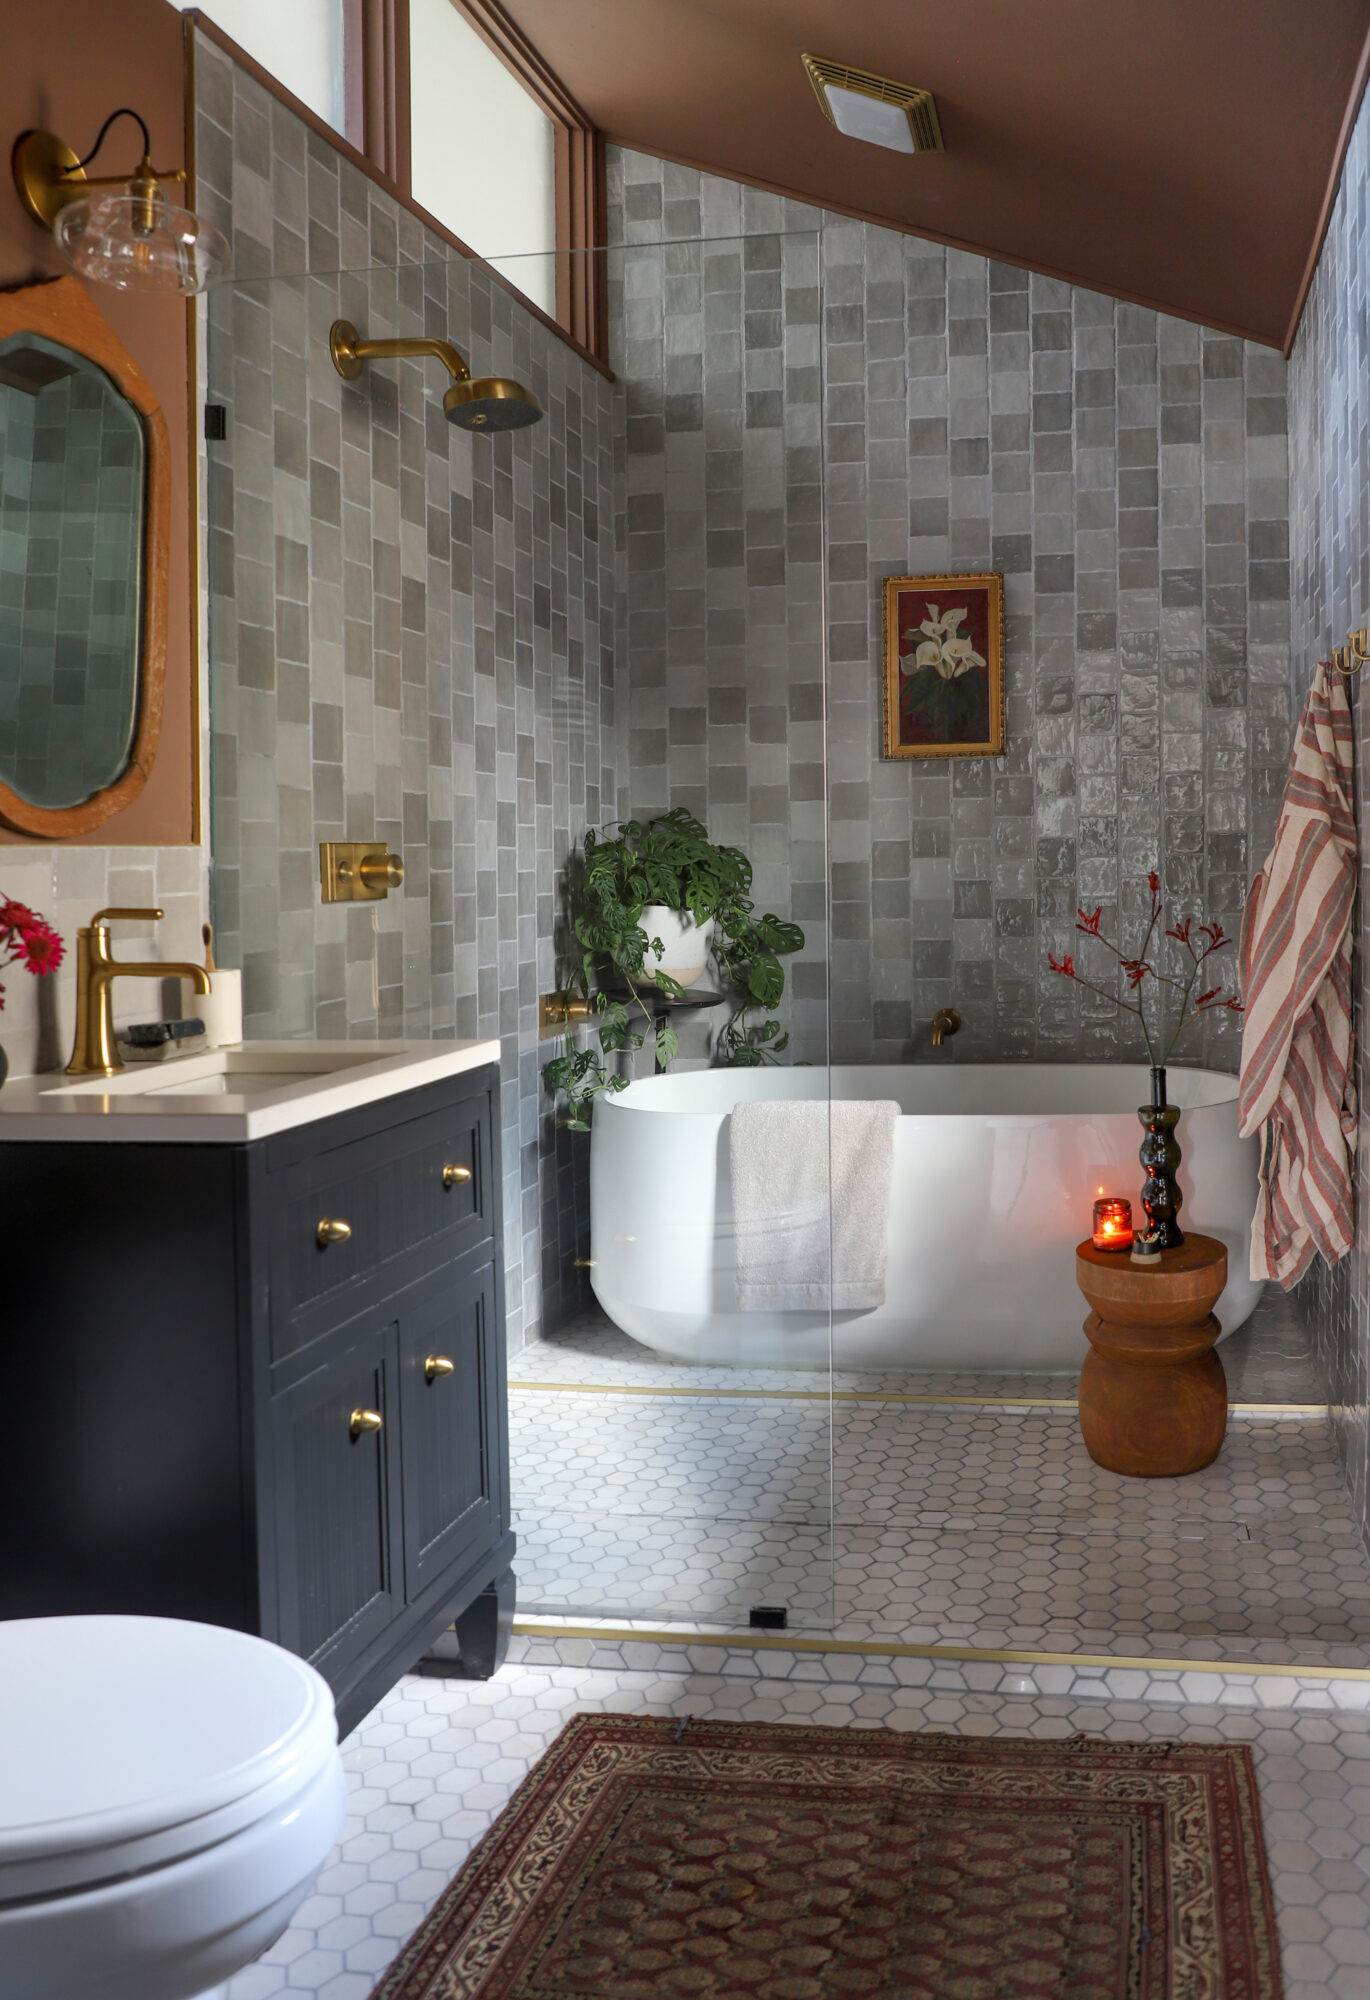 Large bathroom with tiled walls and flooring that has touches of warm accents from accessories.